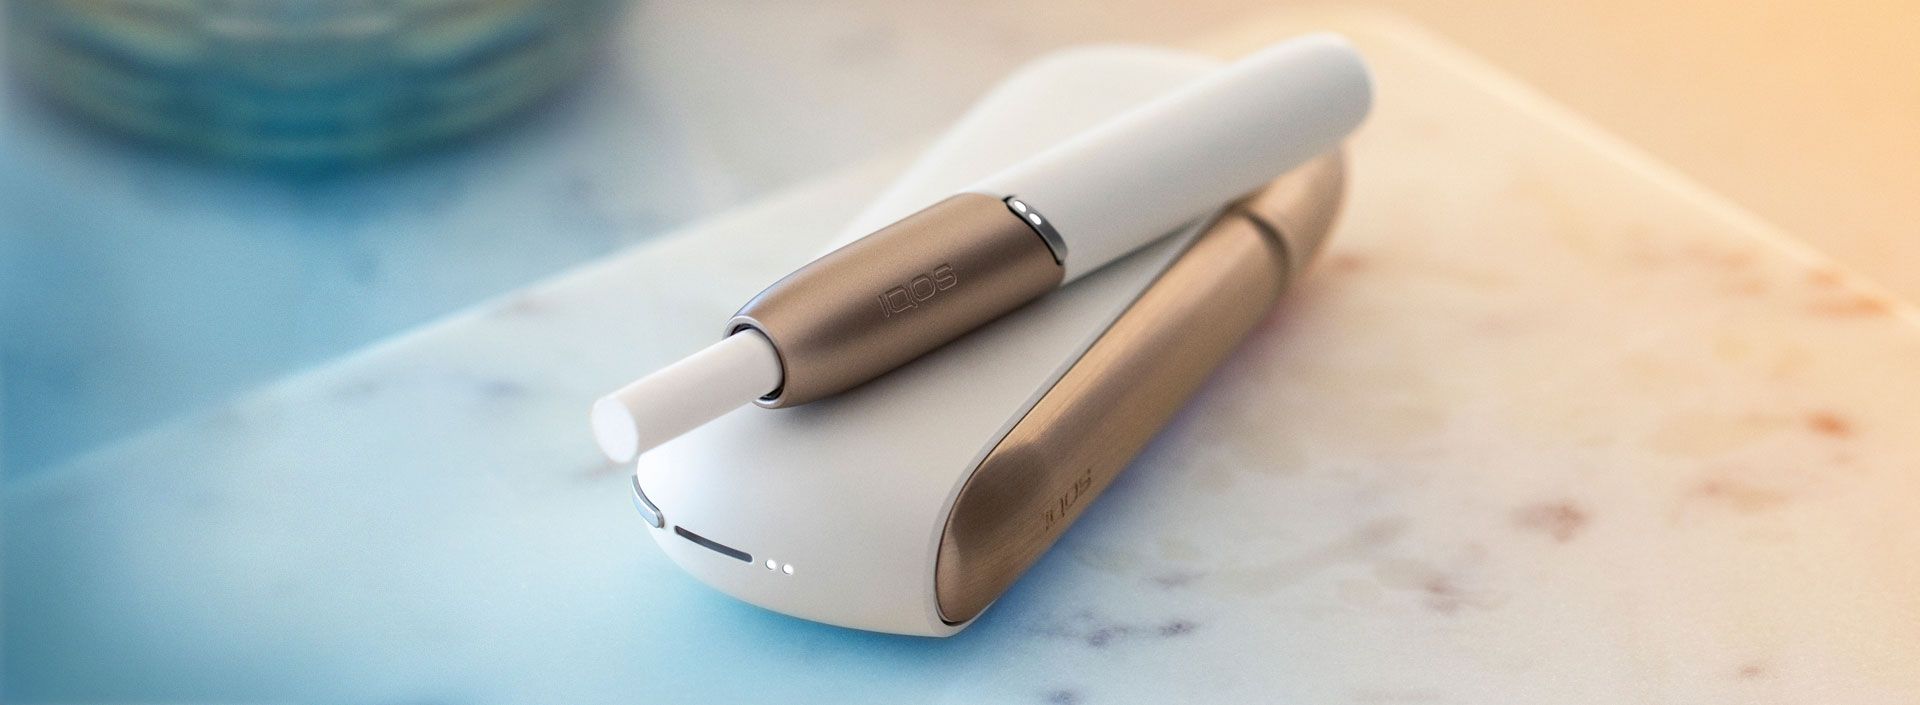 IQOS 3 DUO in warm white and Brilliant Gold